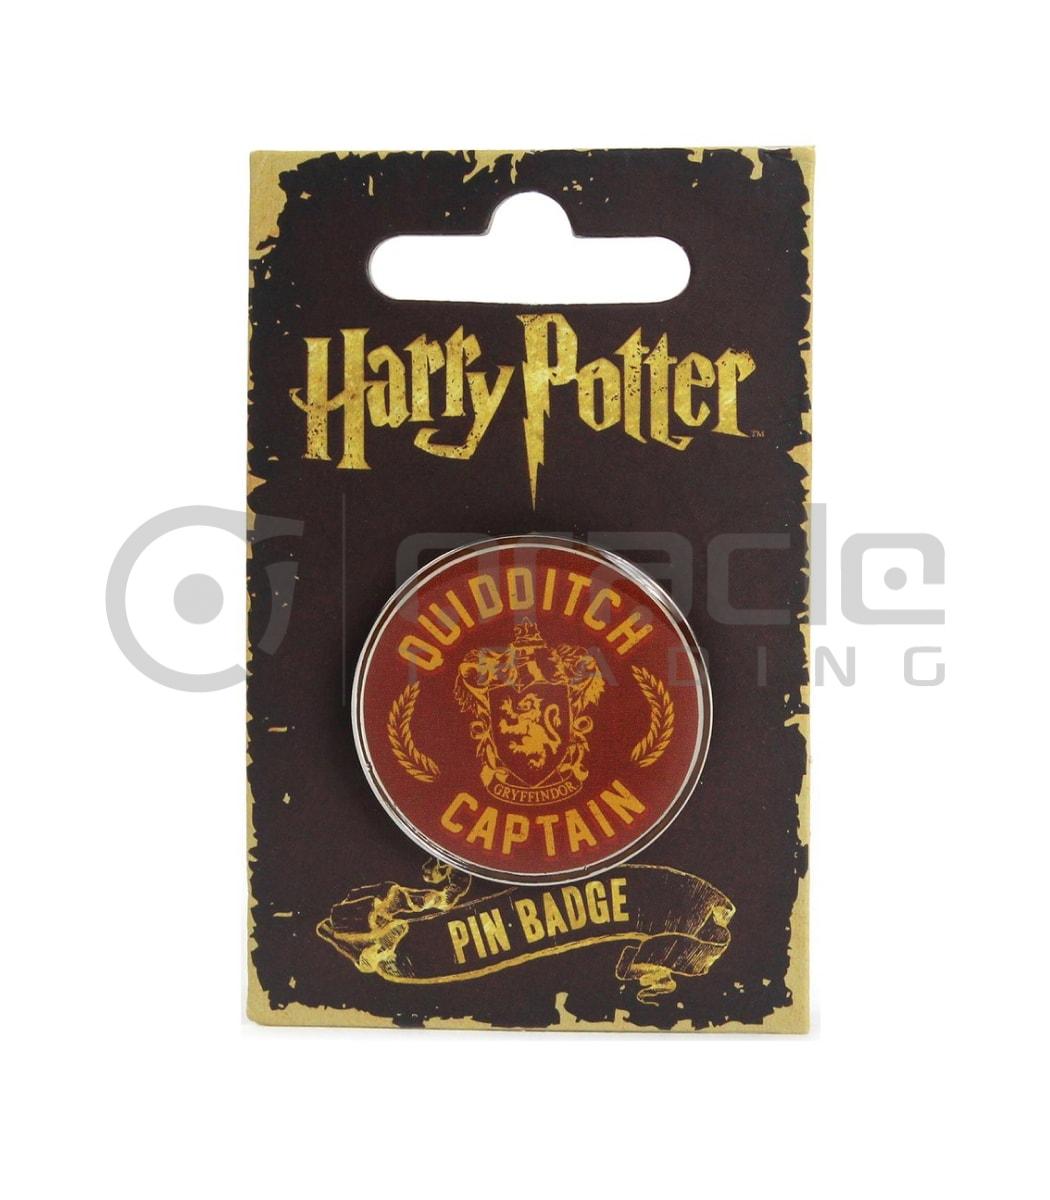 Harry Potter Pin Badge - Quidditch Captain